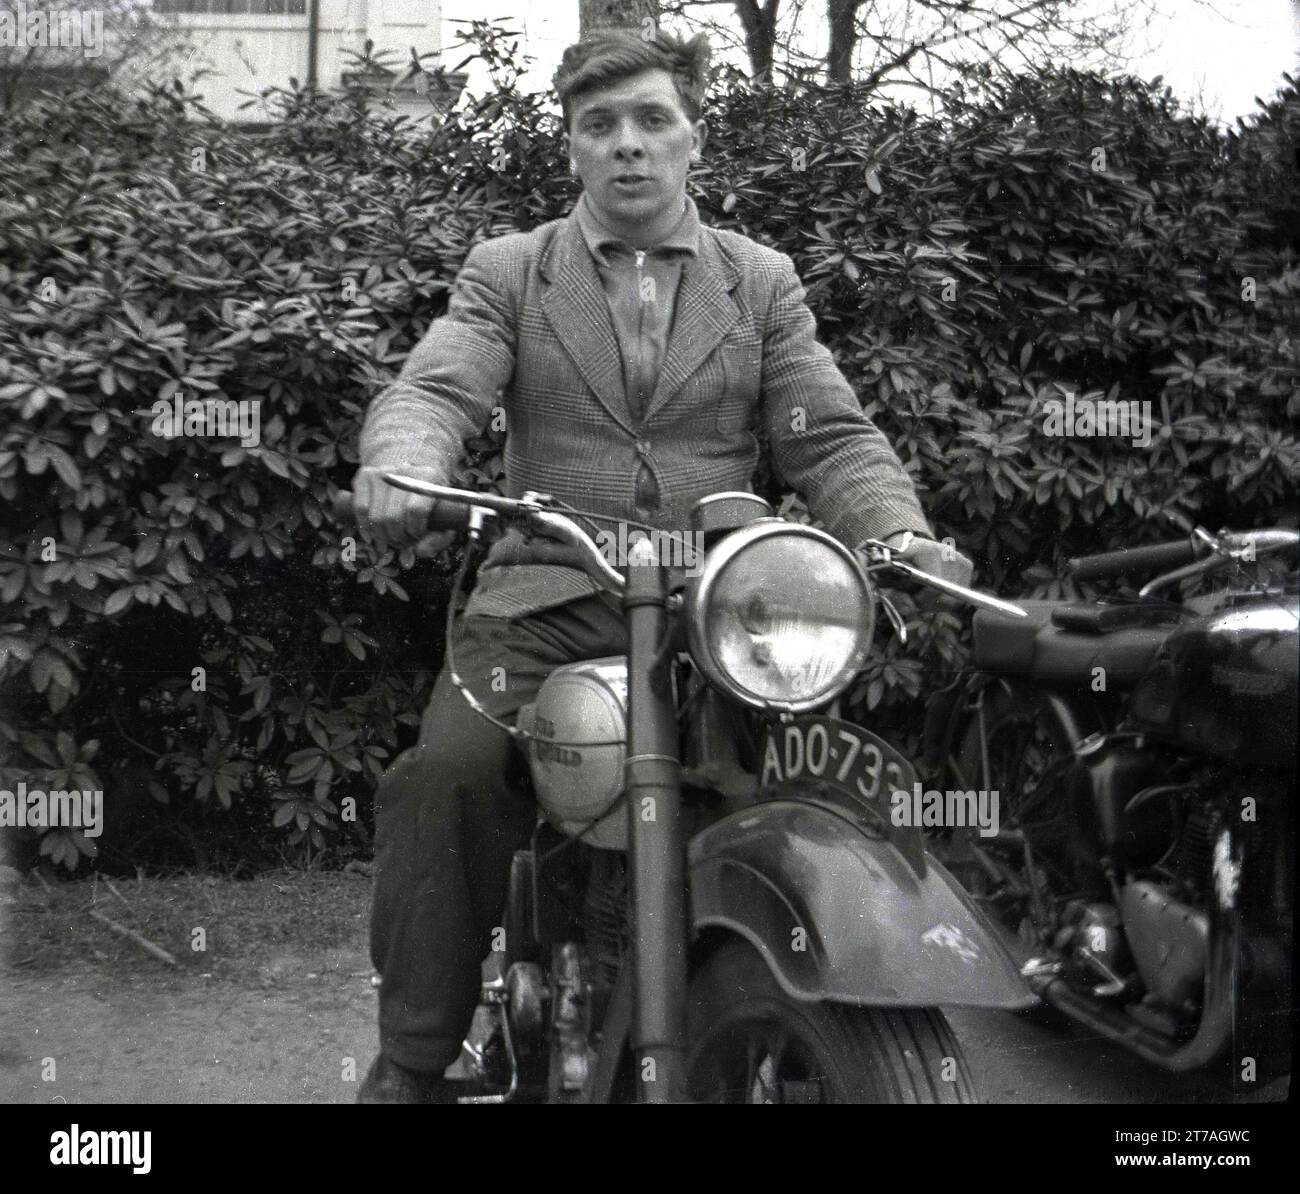 1950s, a young man, early 20s in age, sitting on a Royal Enfield motorcycle of the era, Oldham, Manchester, England, UK. British made Royal Enfield motorcycles were made in Redditch, Worcestershire, by the Enfield Cycle Company, with the first one built dating back to 1901. Stock Photo